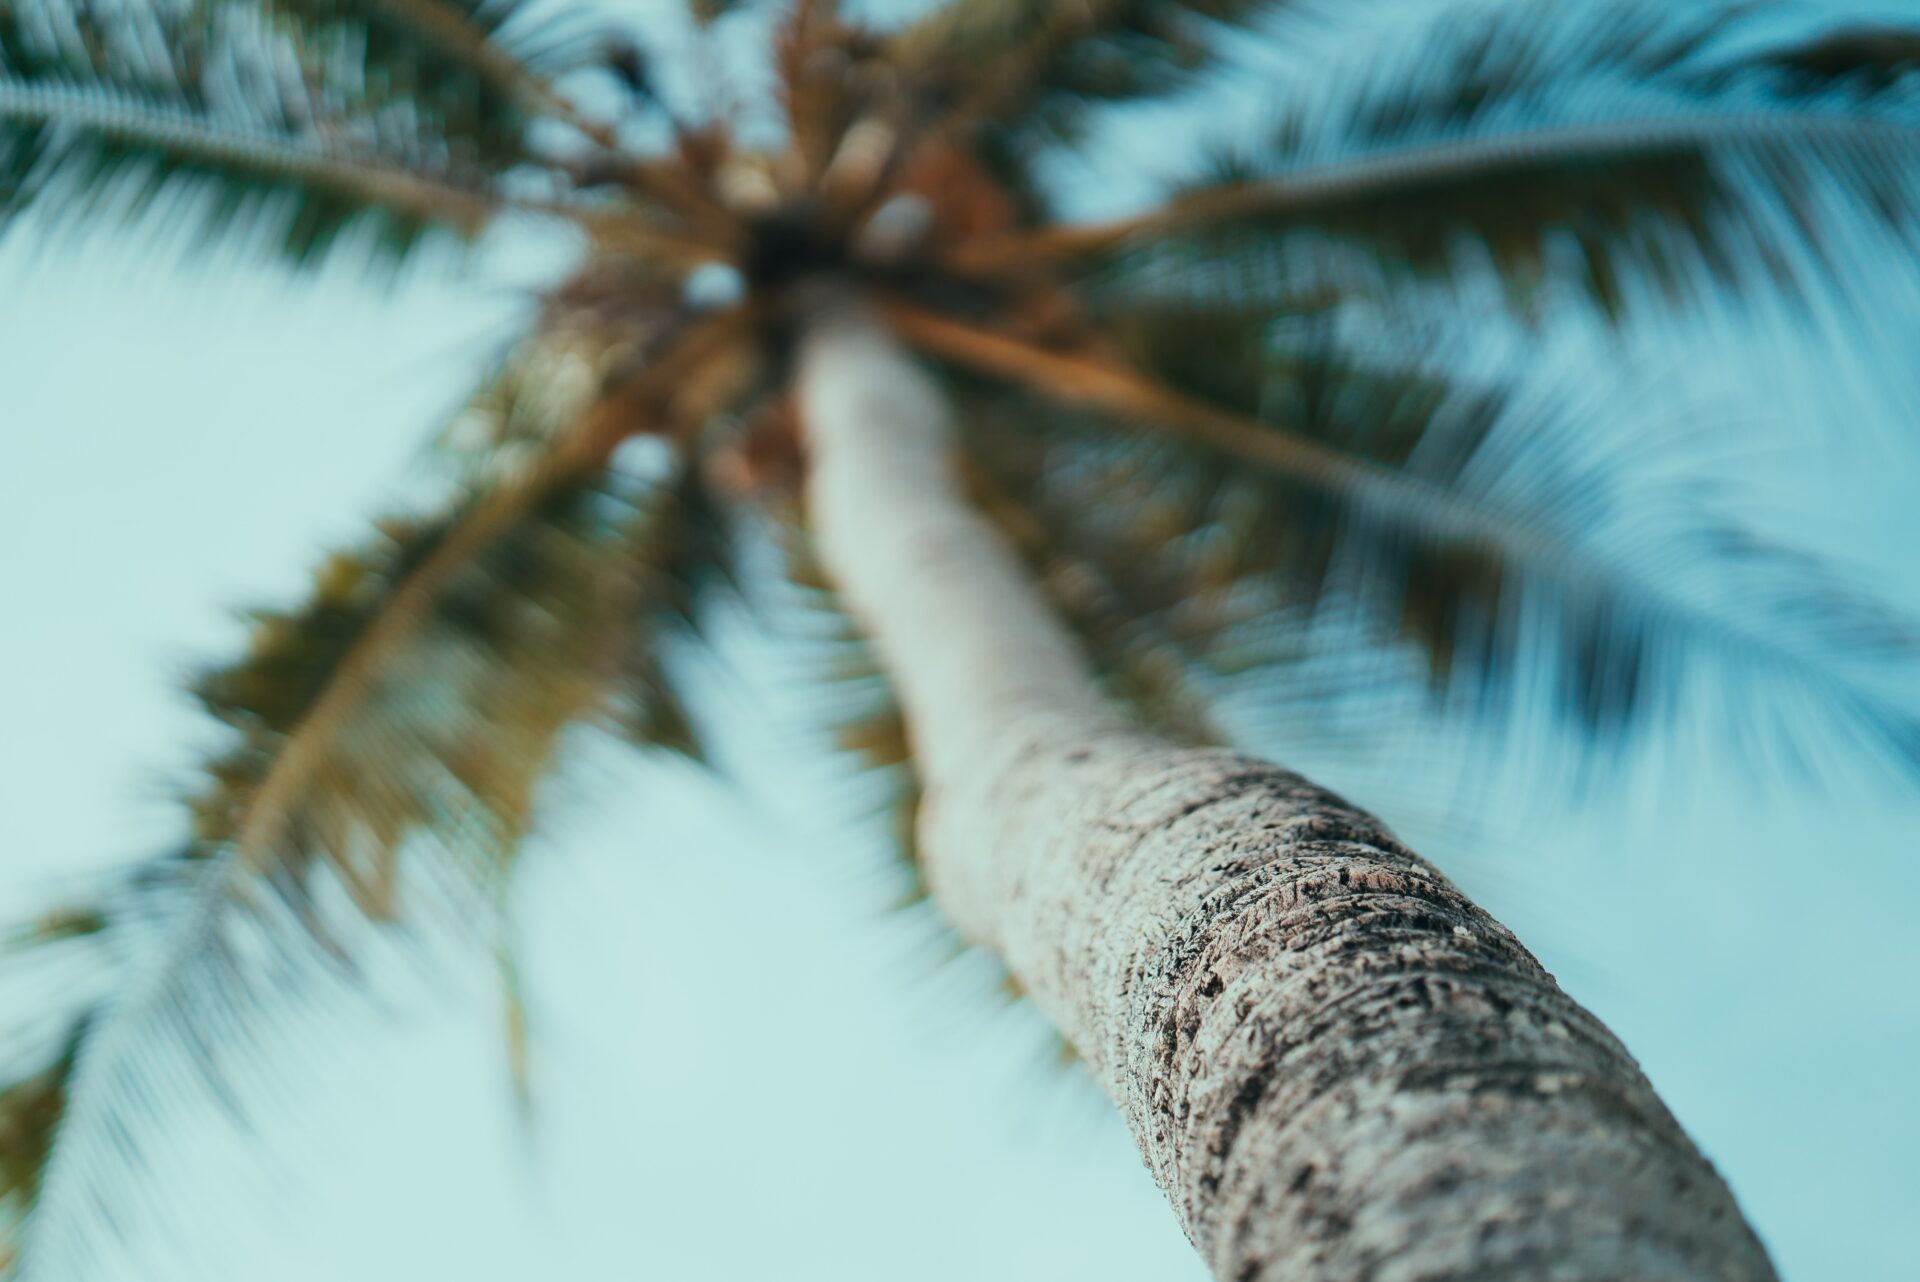 A close-up image of a palm tree taken from below.